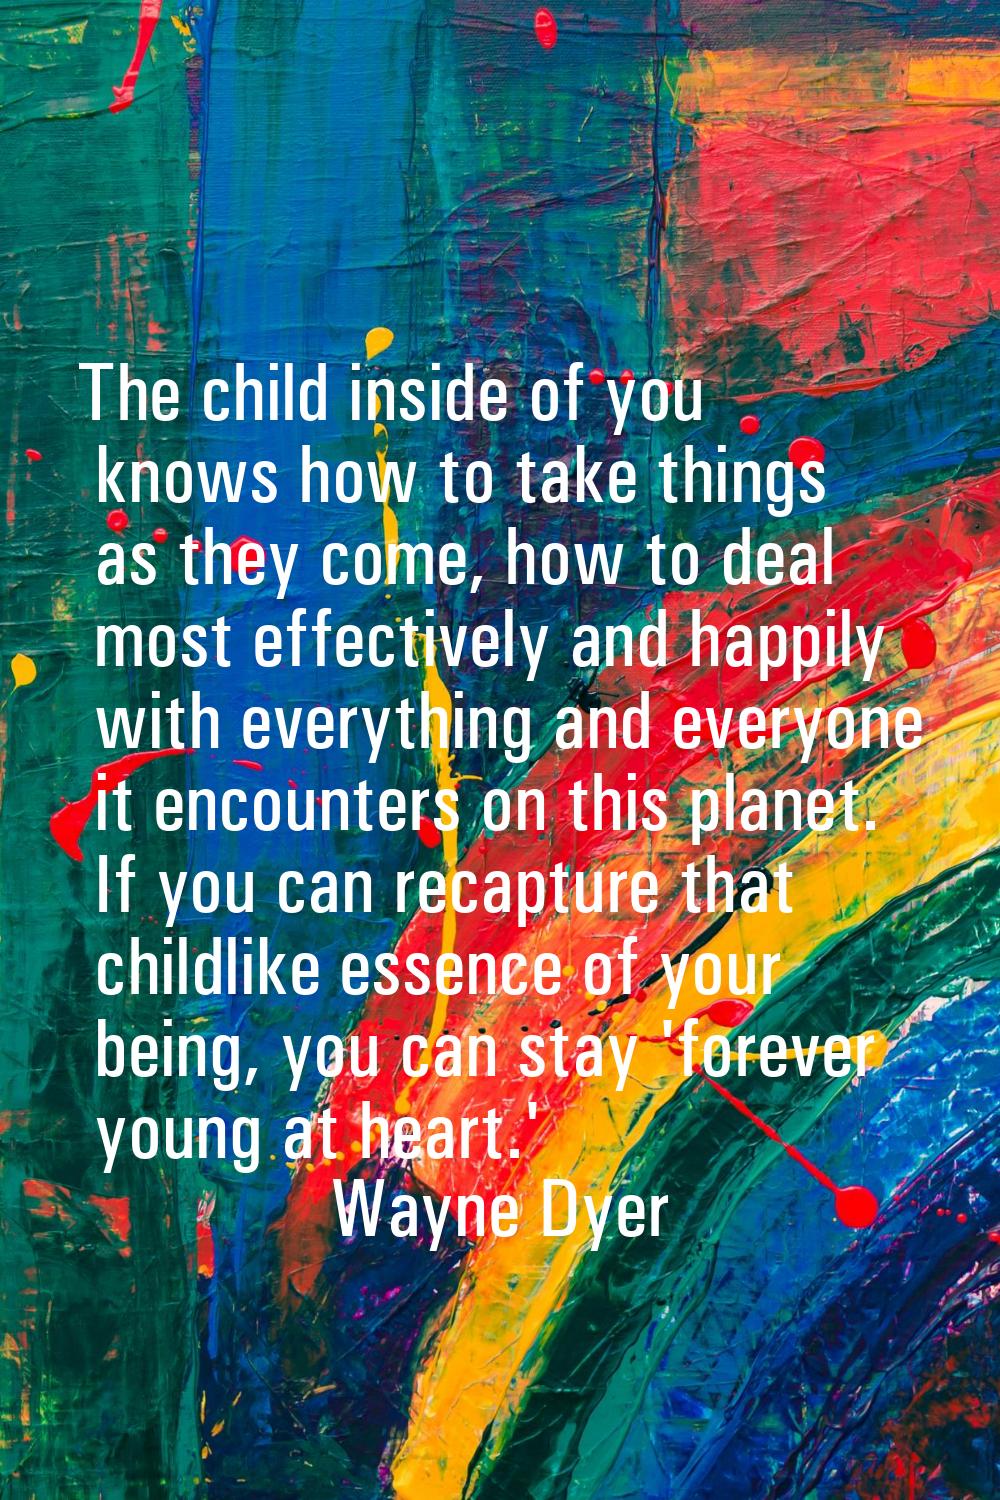 The child inside of you knows how to take things as they come, how to deal most effectively and hap